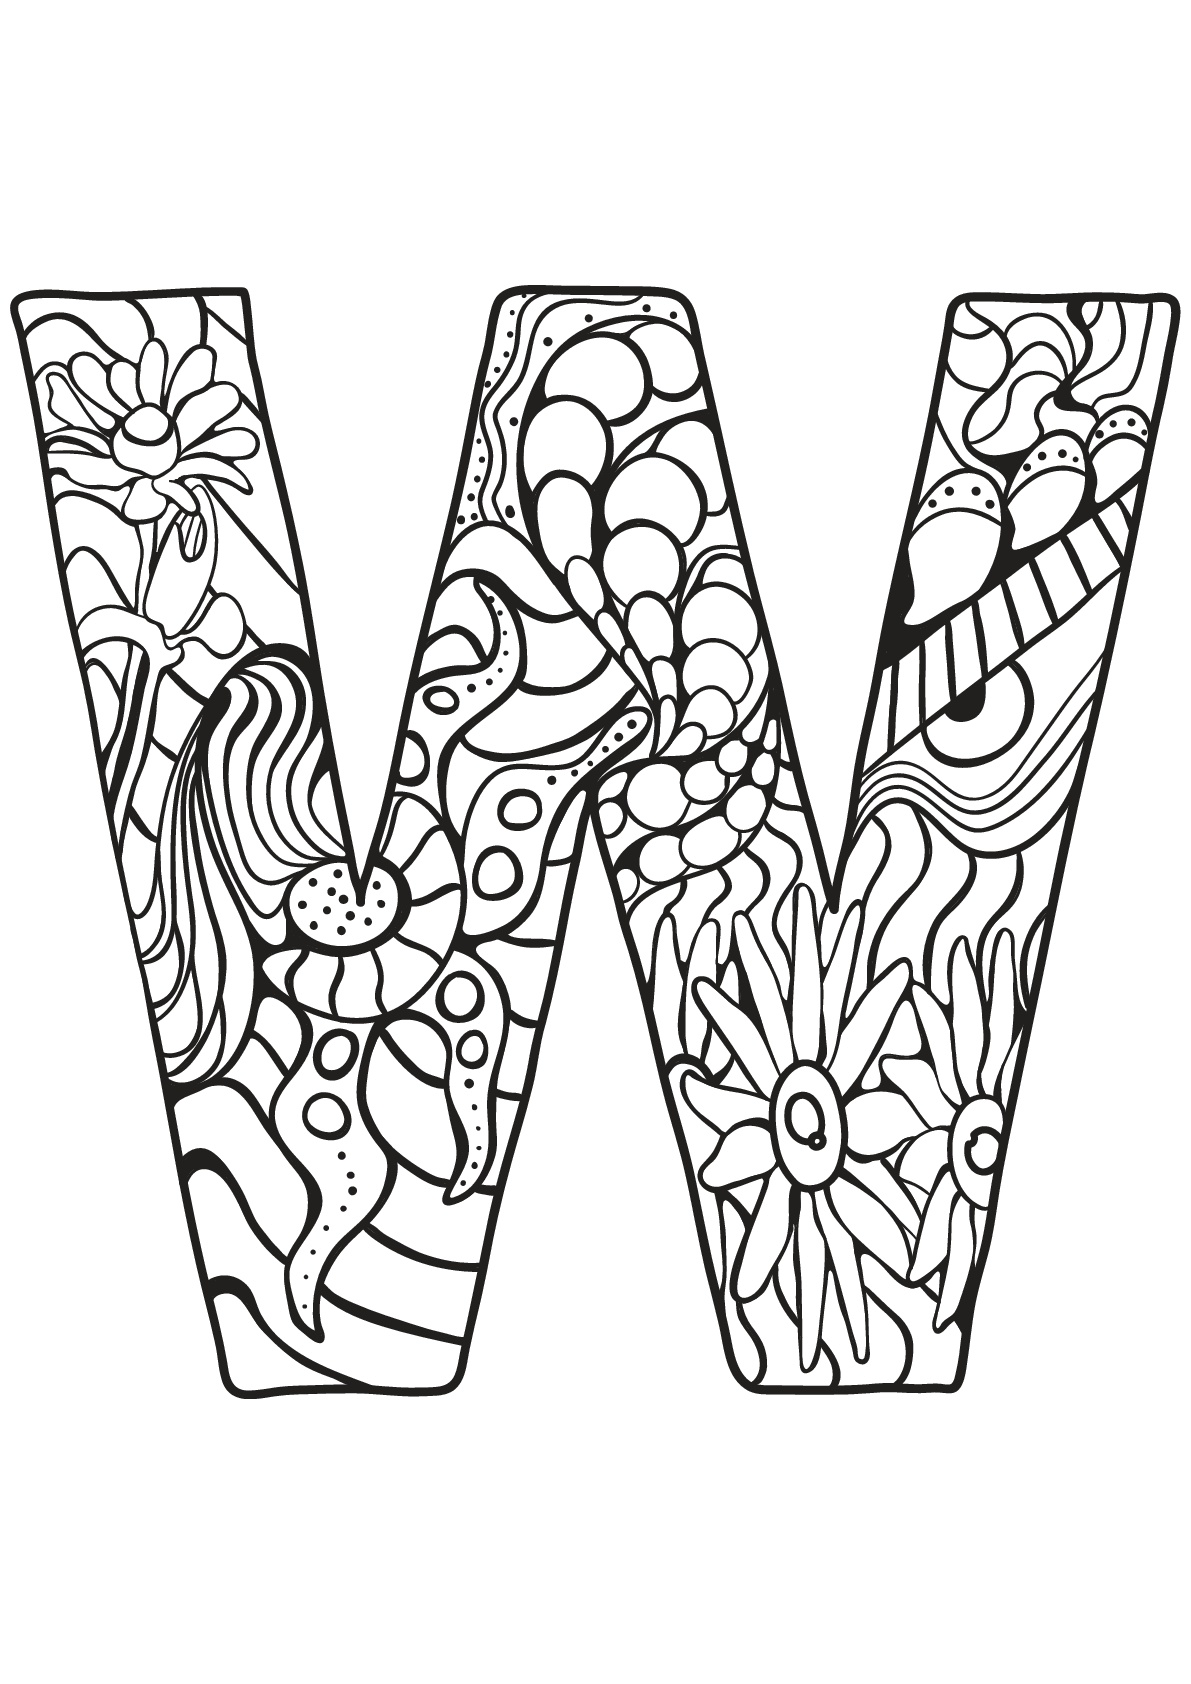 Simple Alphabet coloring page for kids : W